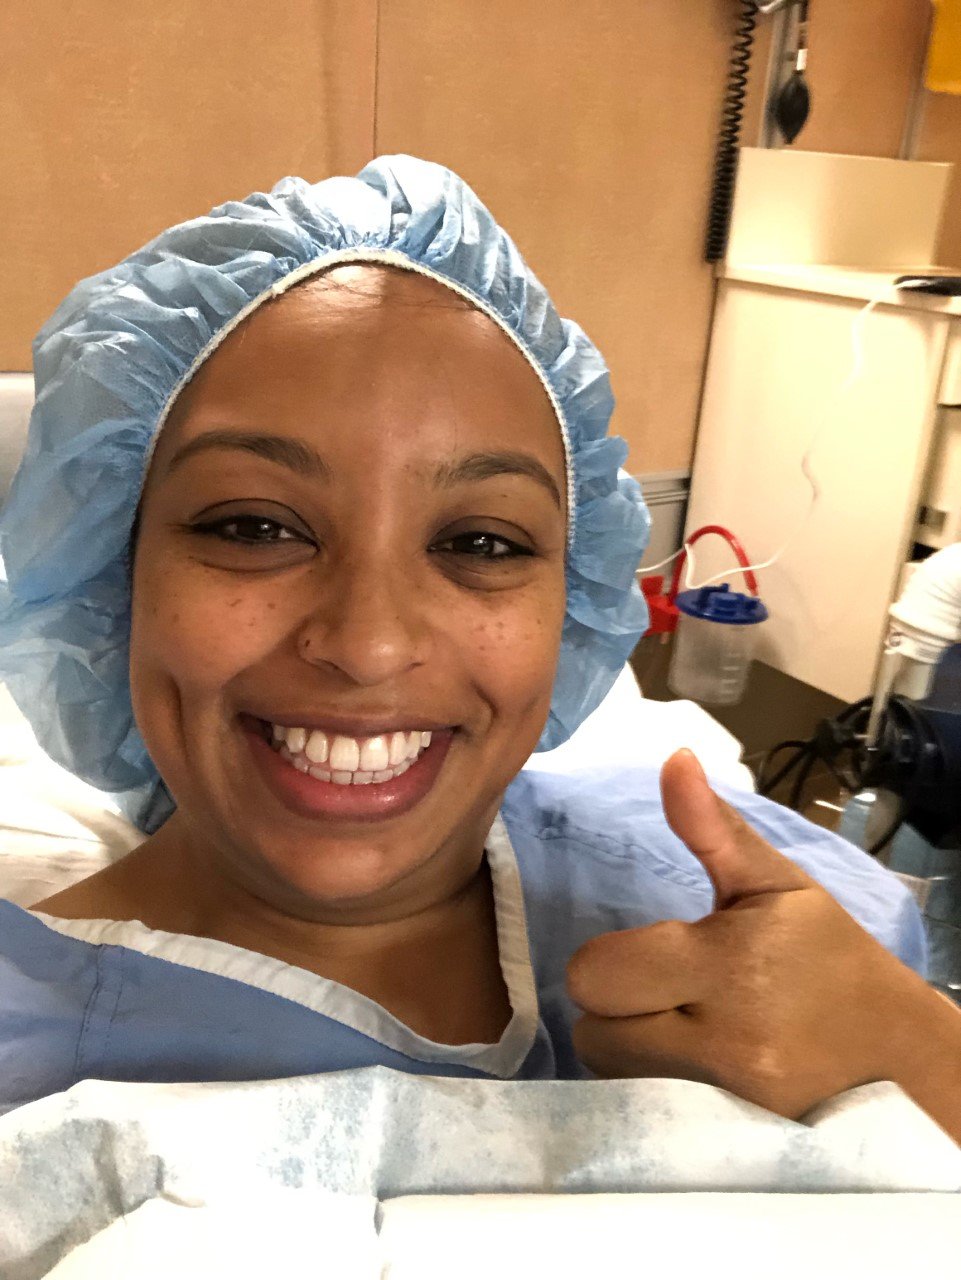 a woman wearing pre-surgery scrubs and hair net gives the camera thumbs up